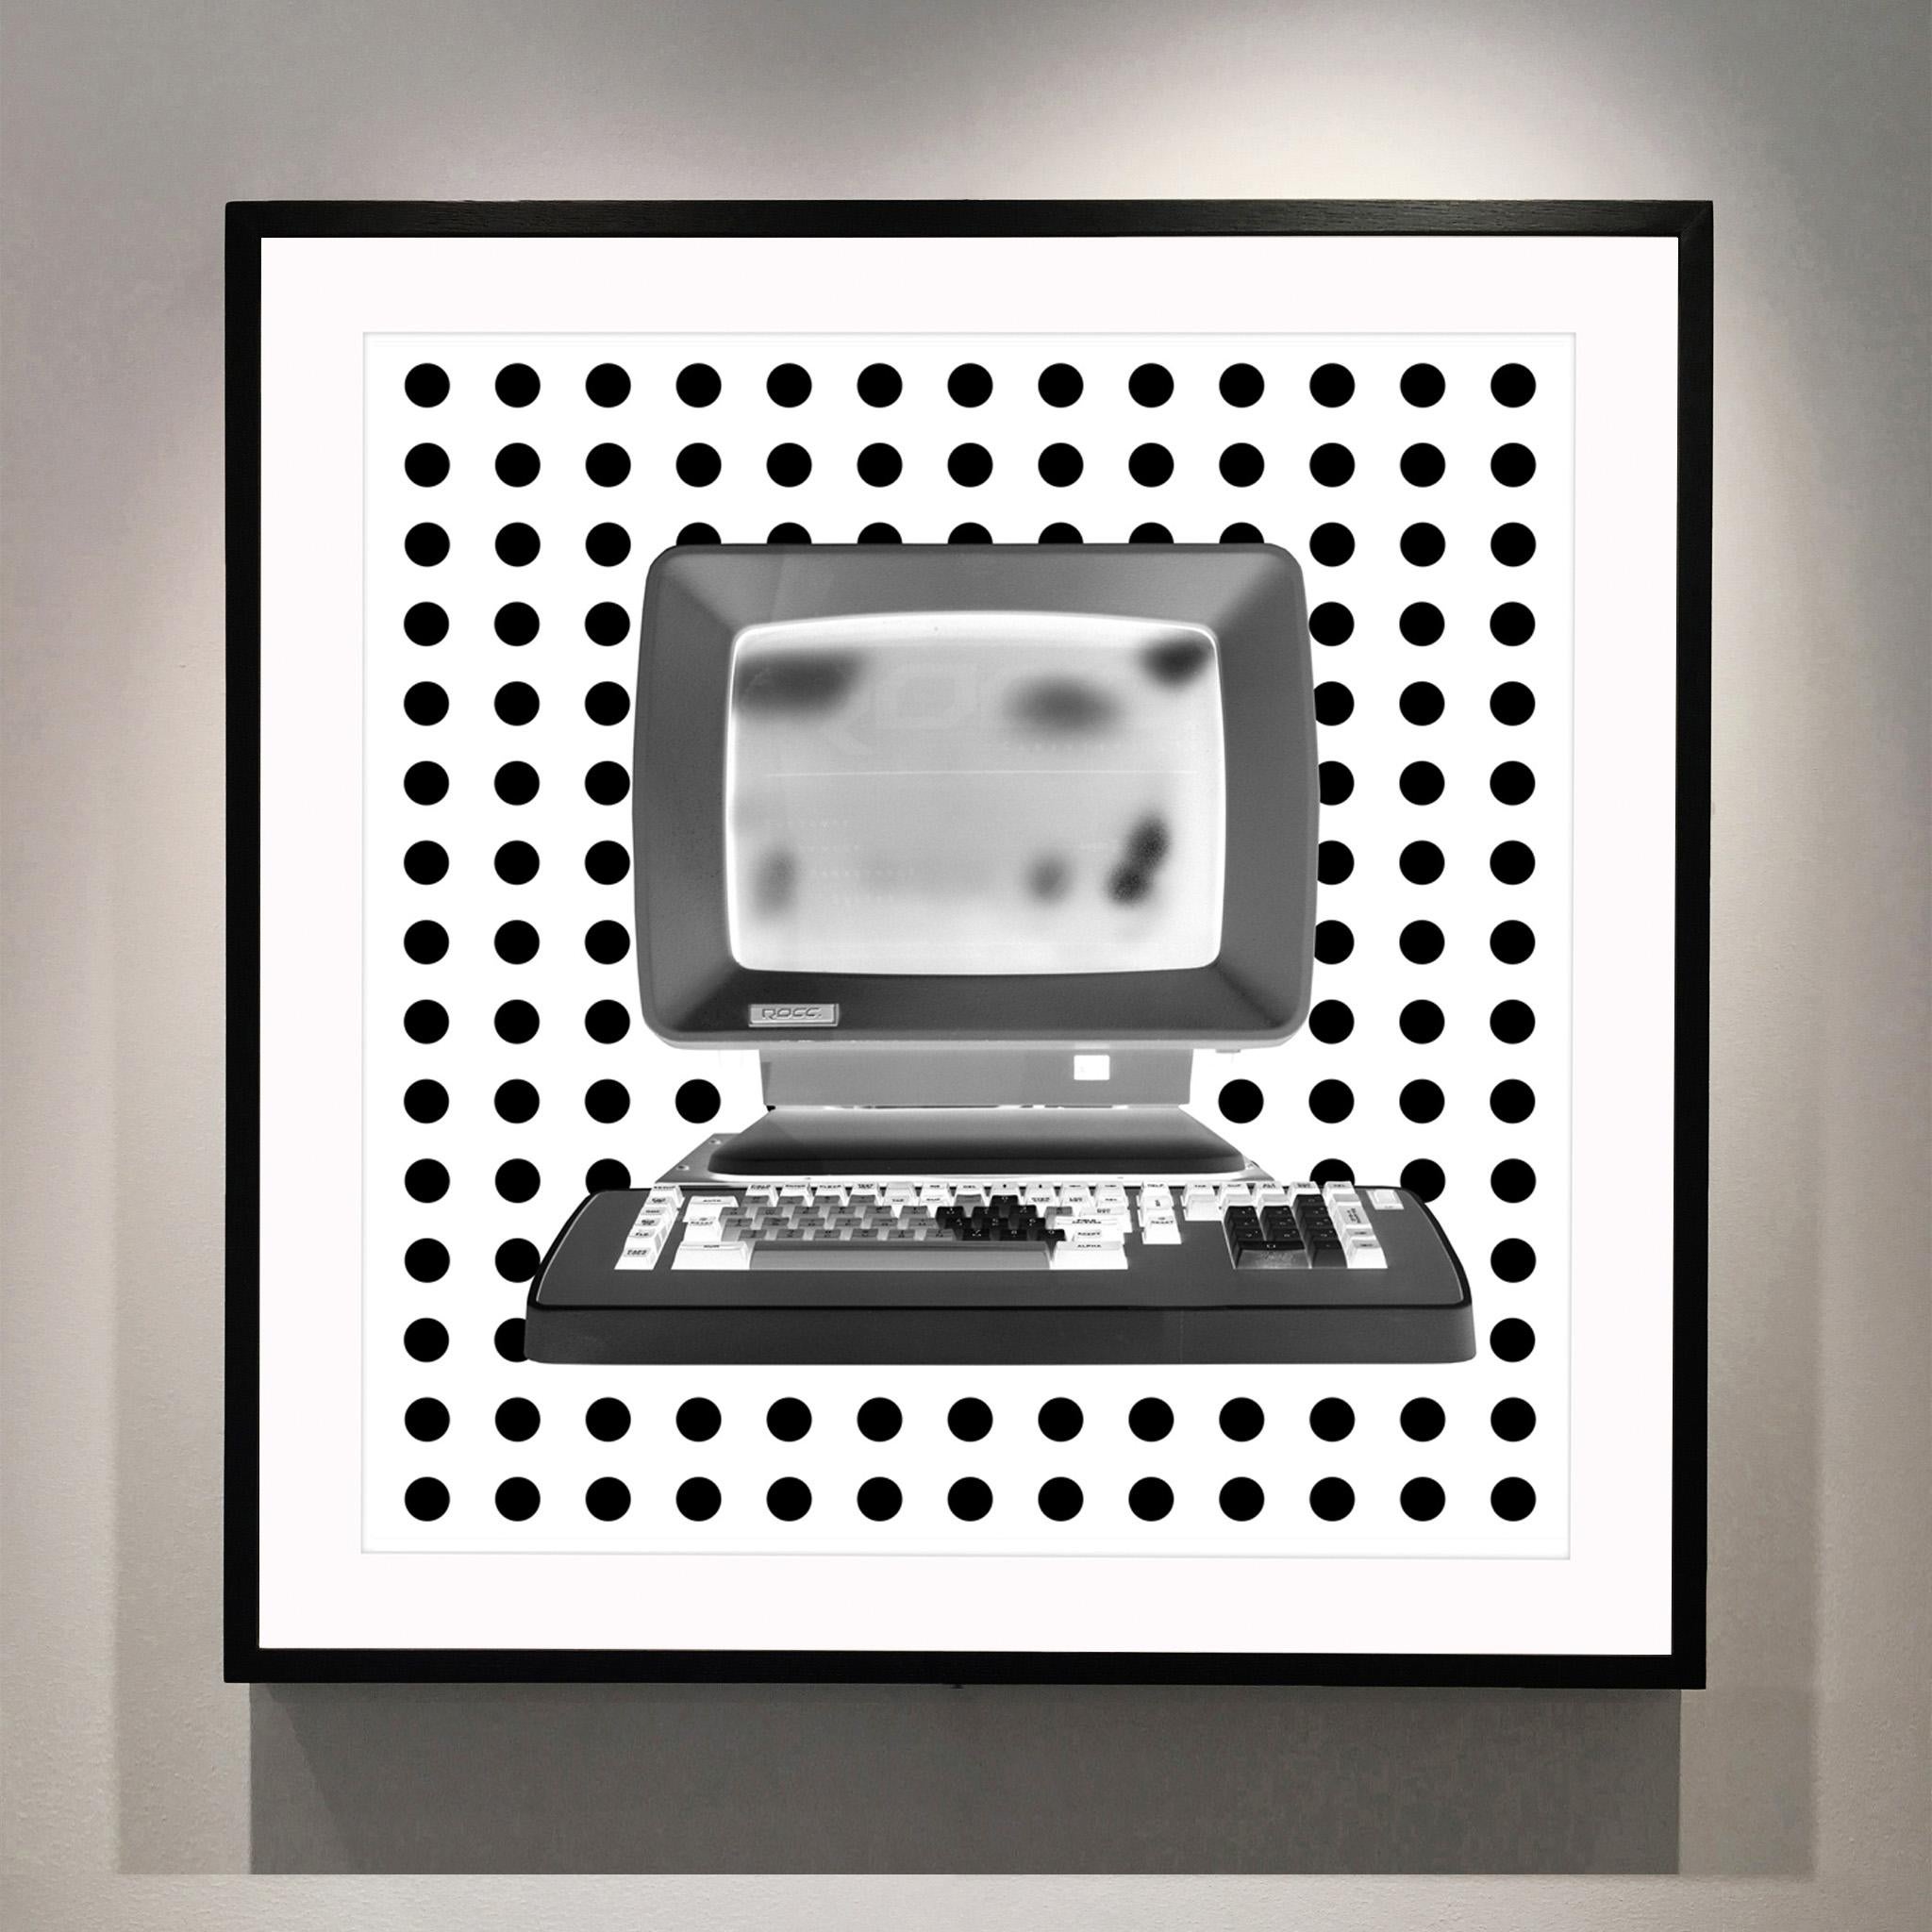 Personal Computer Series 'Alpha' - Black and white pop art photography - Photograph by Samuel Field